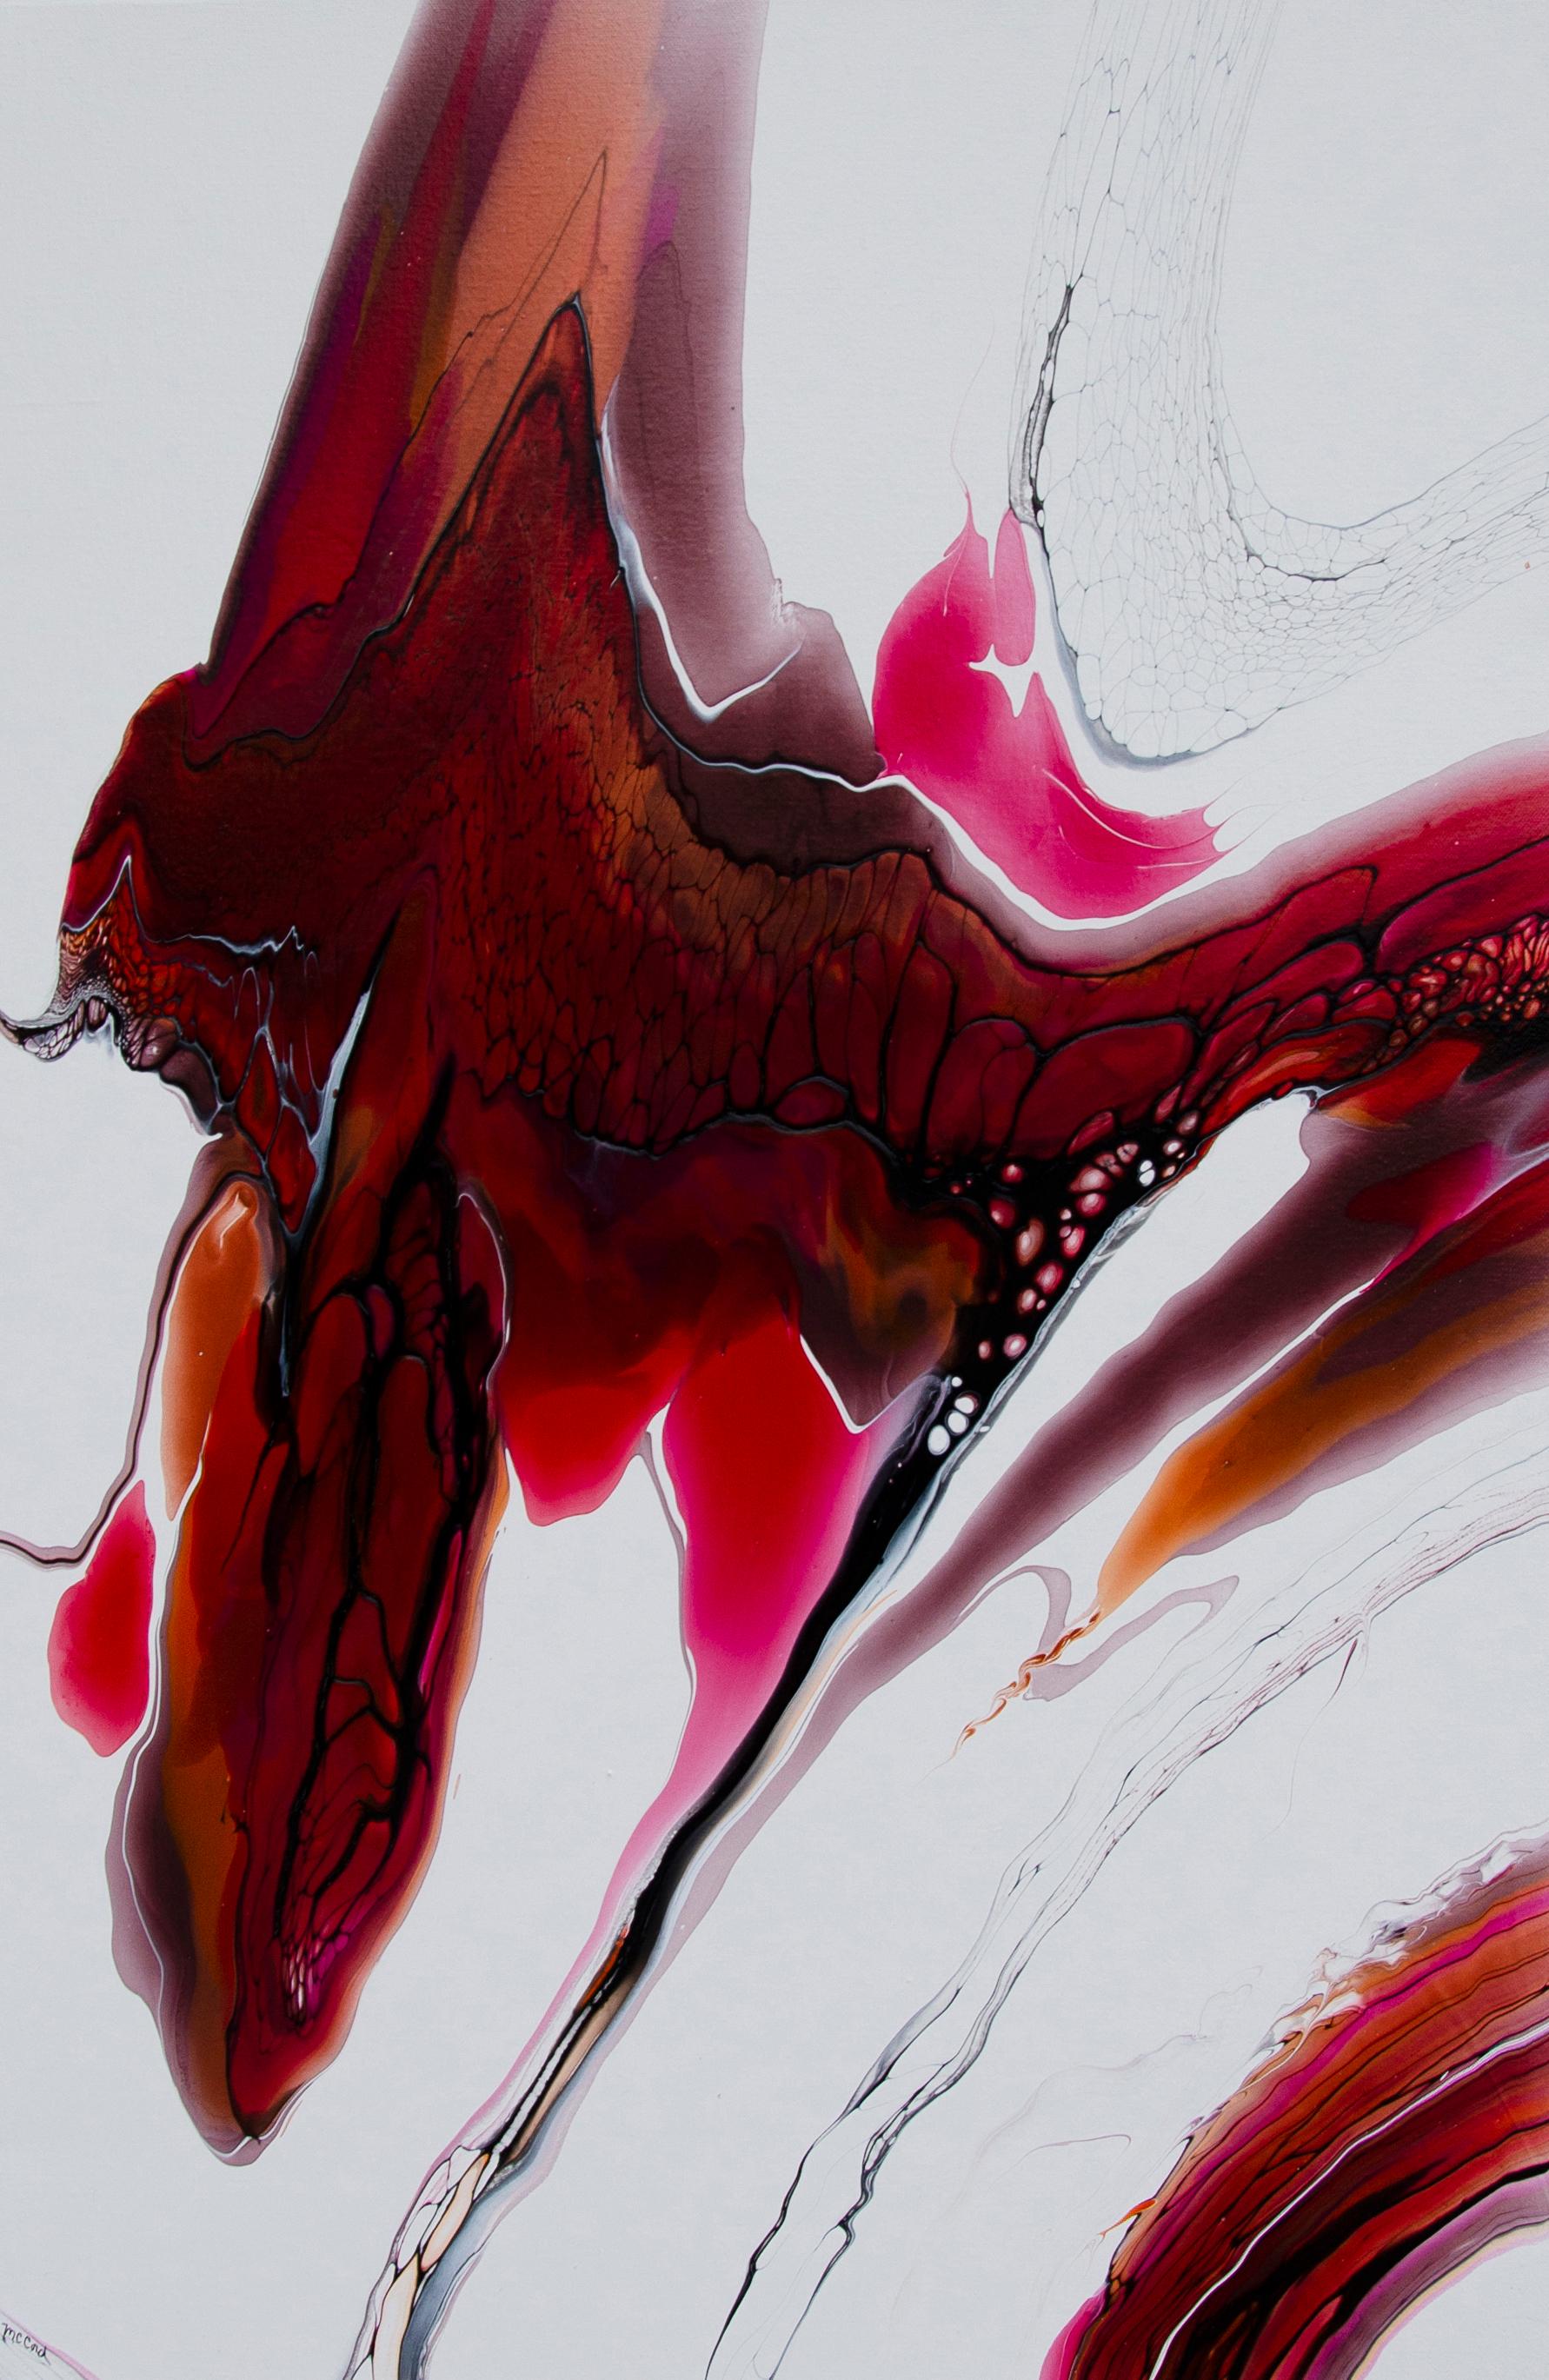 <p>Artist Comments<br>Artist Linda McCord explores the concept of forgotten ambitions in her Whiteout Dreams series. In this piece, Linda employs the acrylic pouring method and orchestrates an enticing dance between red, black, and white. "I paid